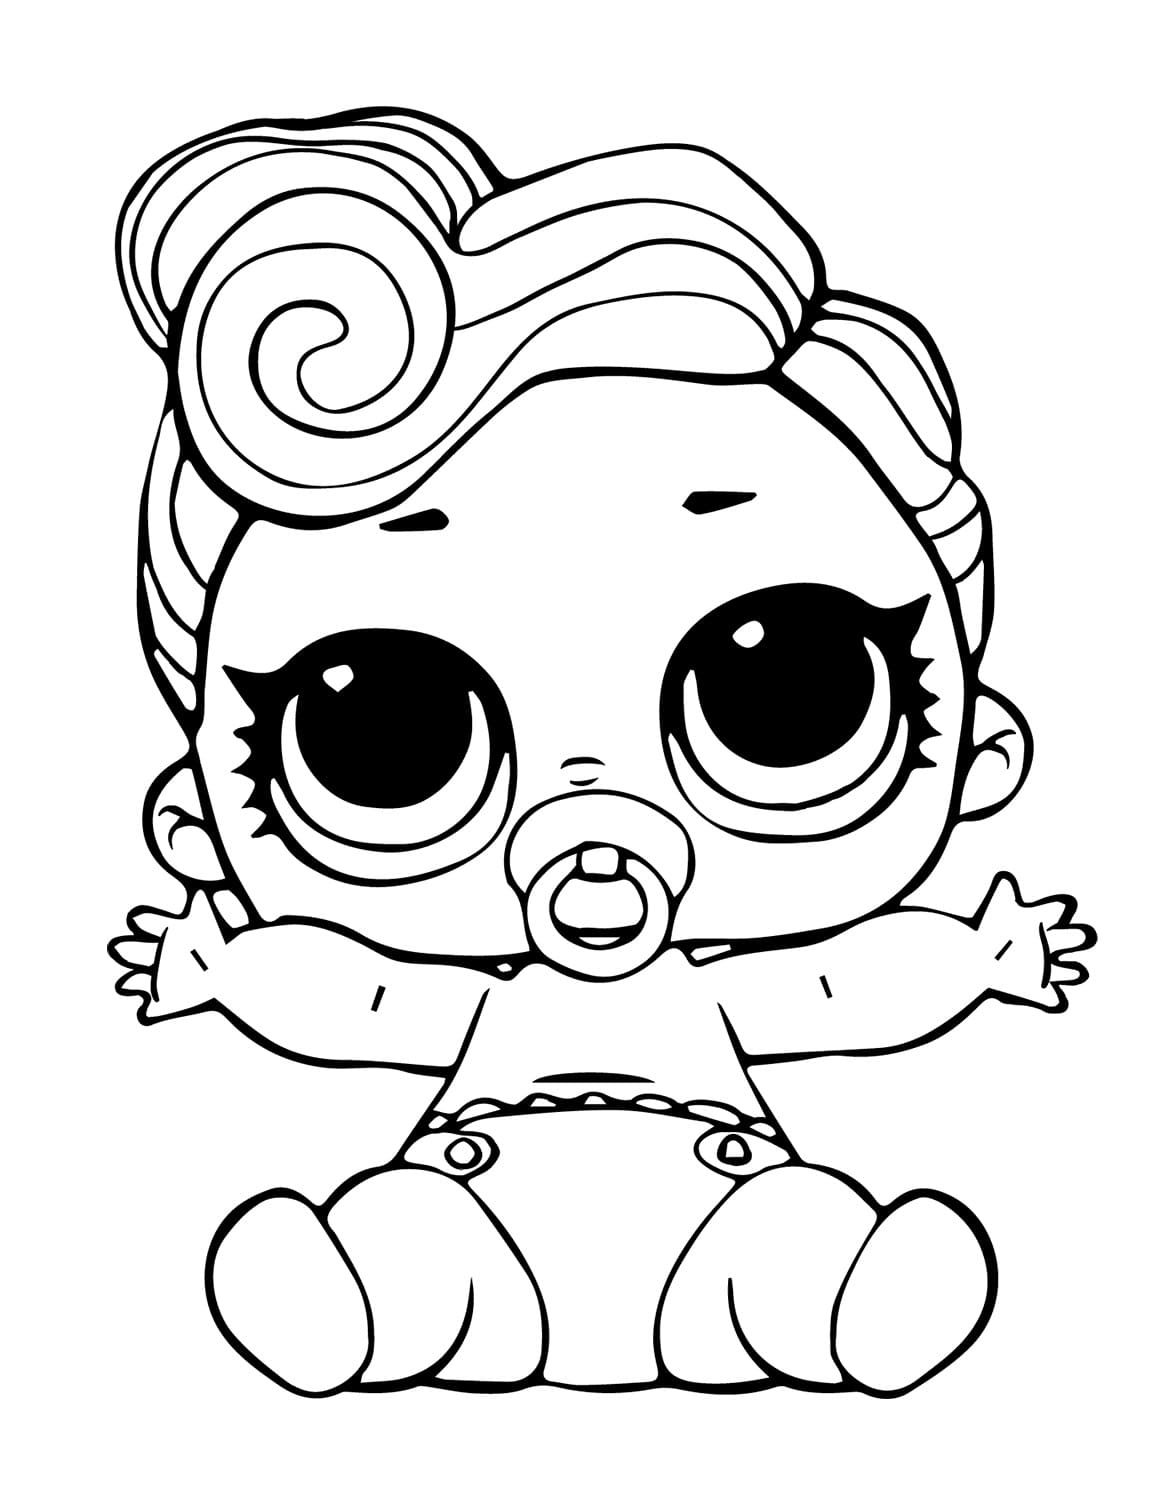 The Lil Queen LOL coloring page